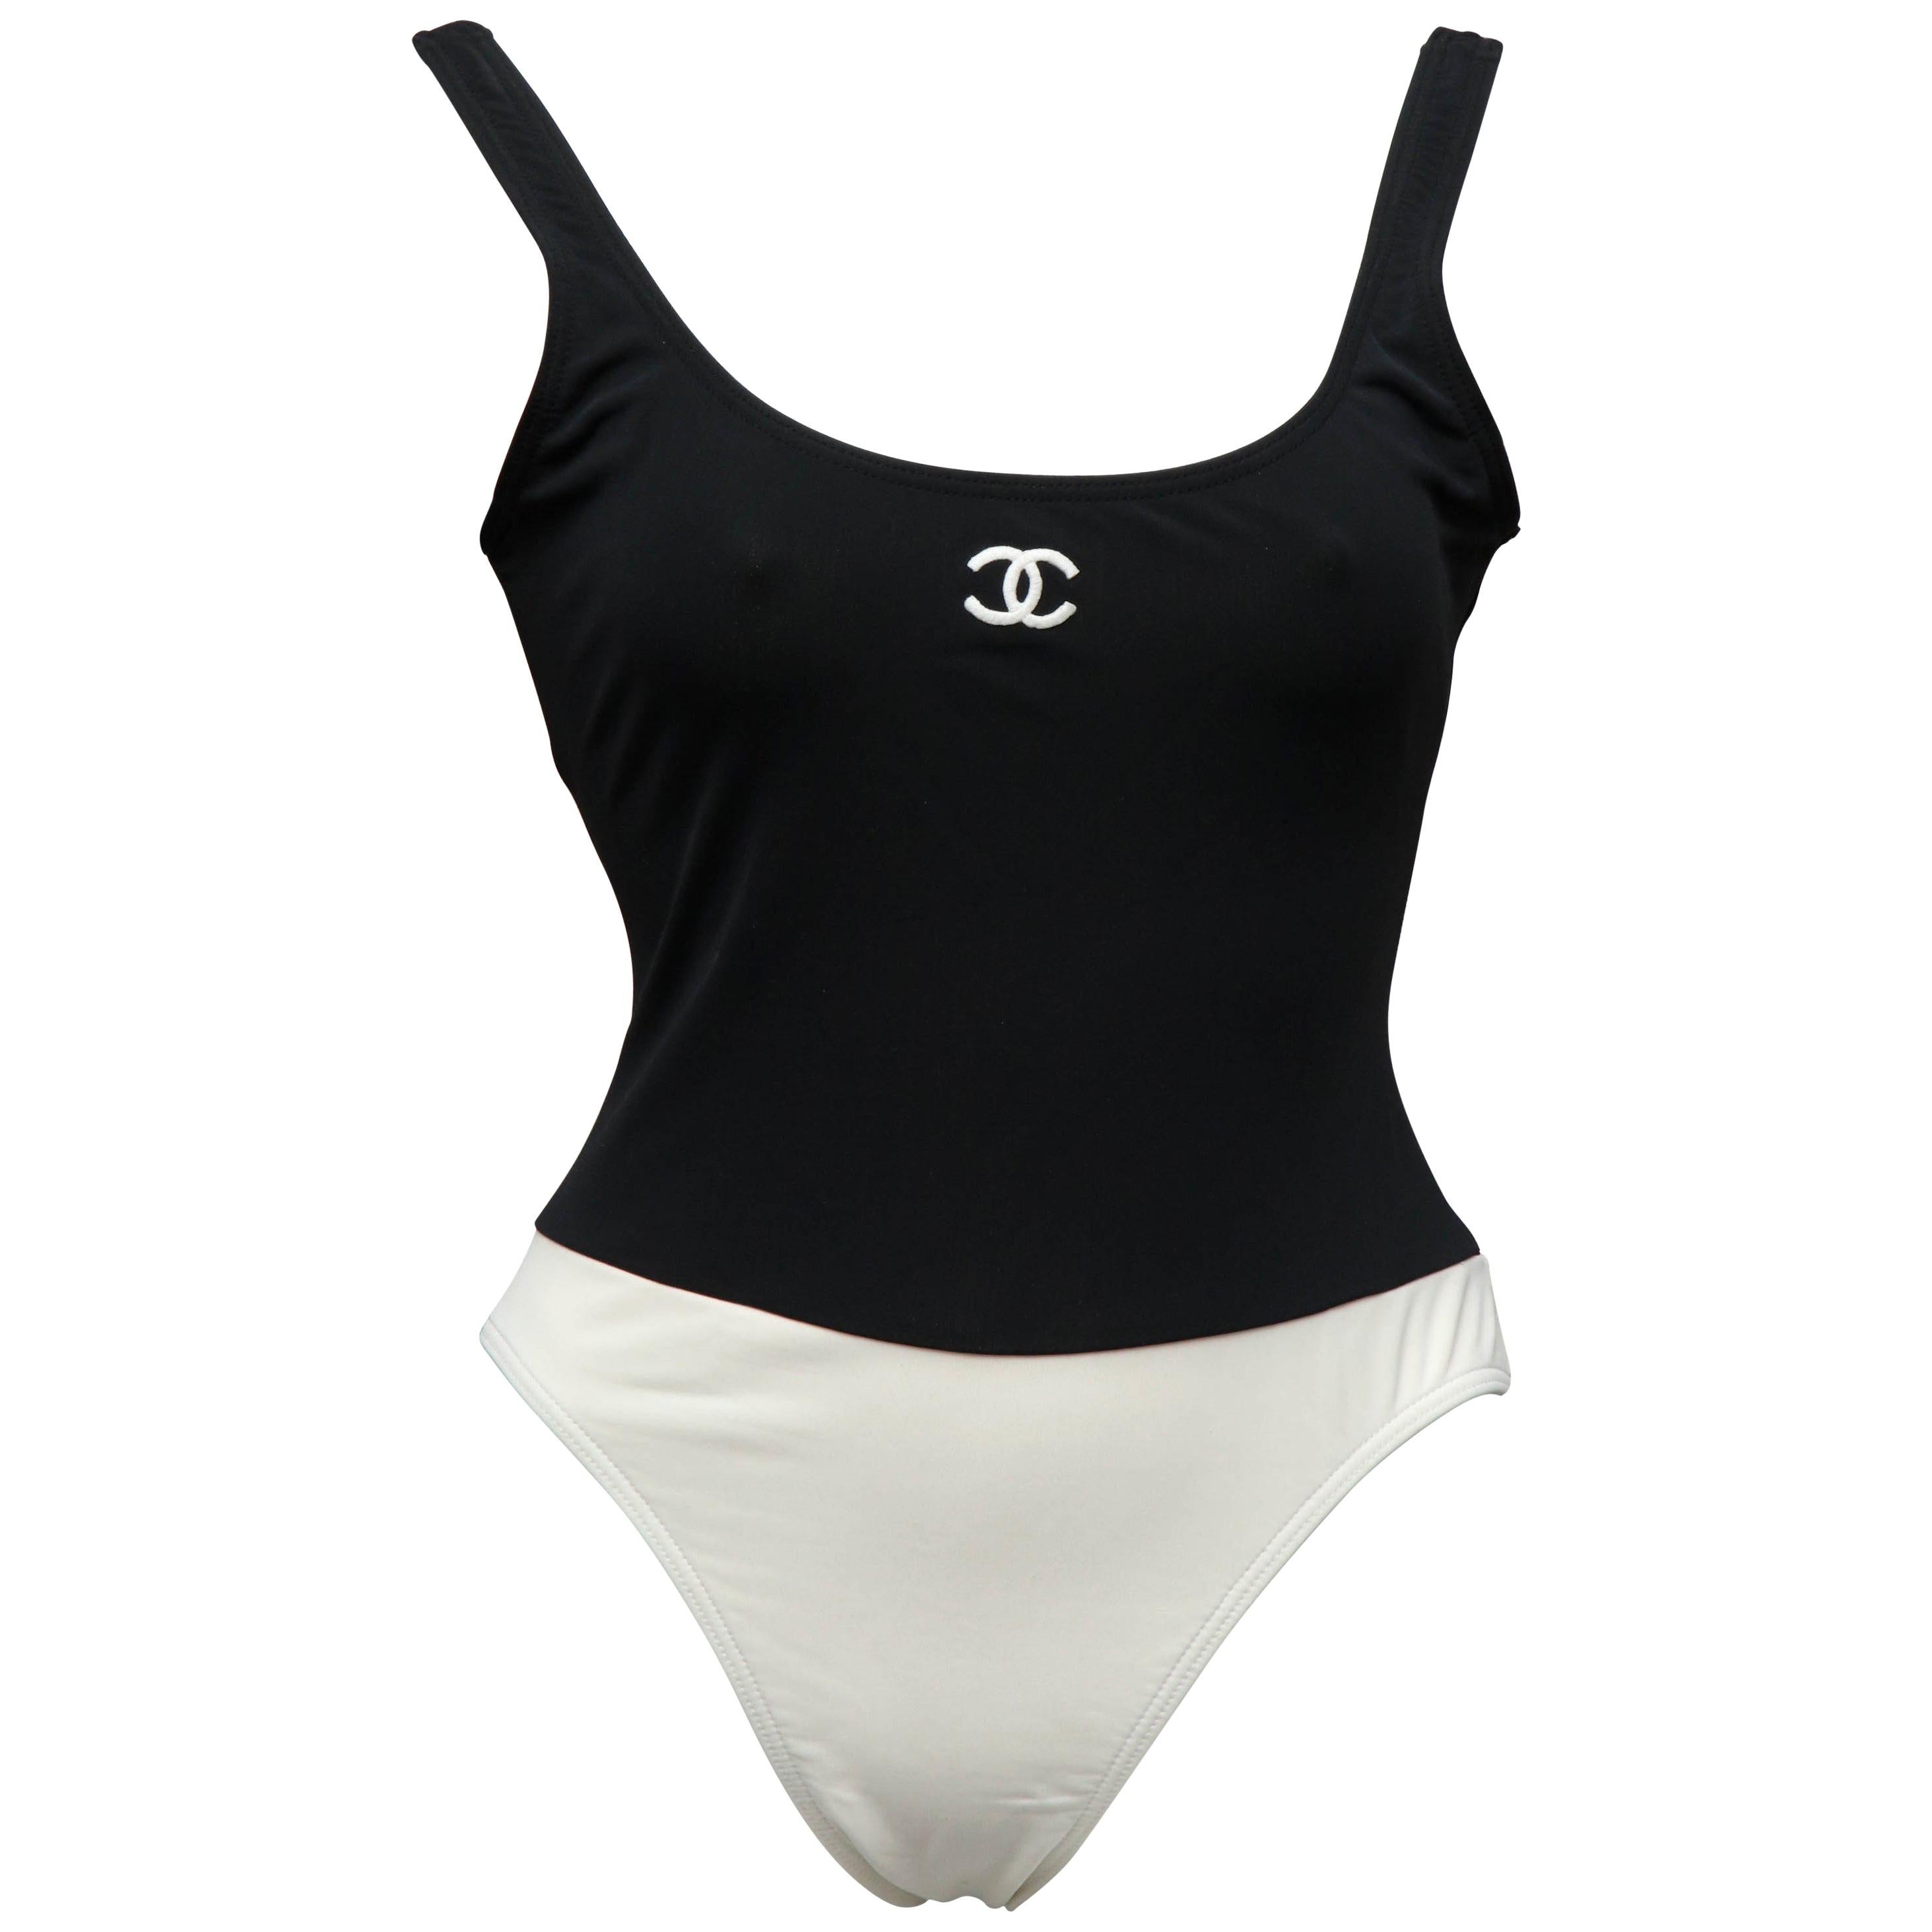 CHANEl Swimsuit 1 Star Printed Coin with CC logo Multiple colors